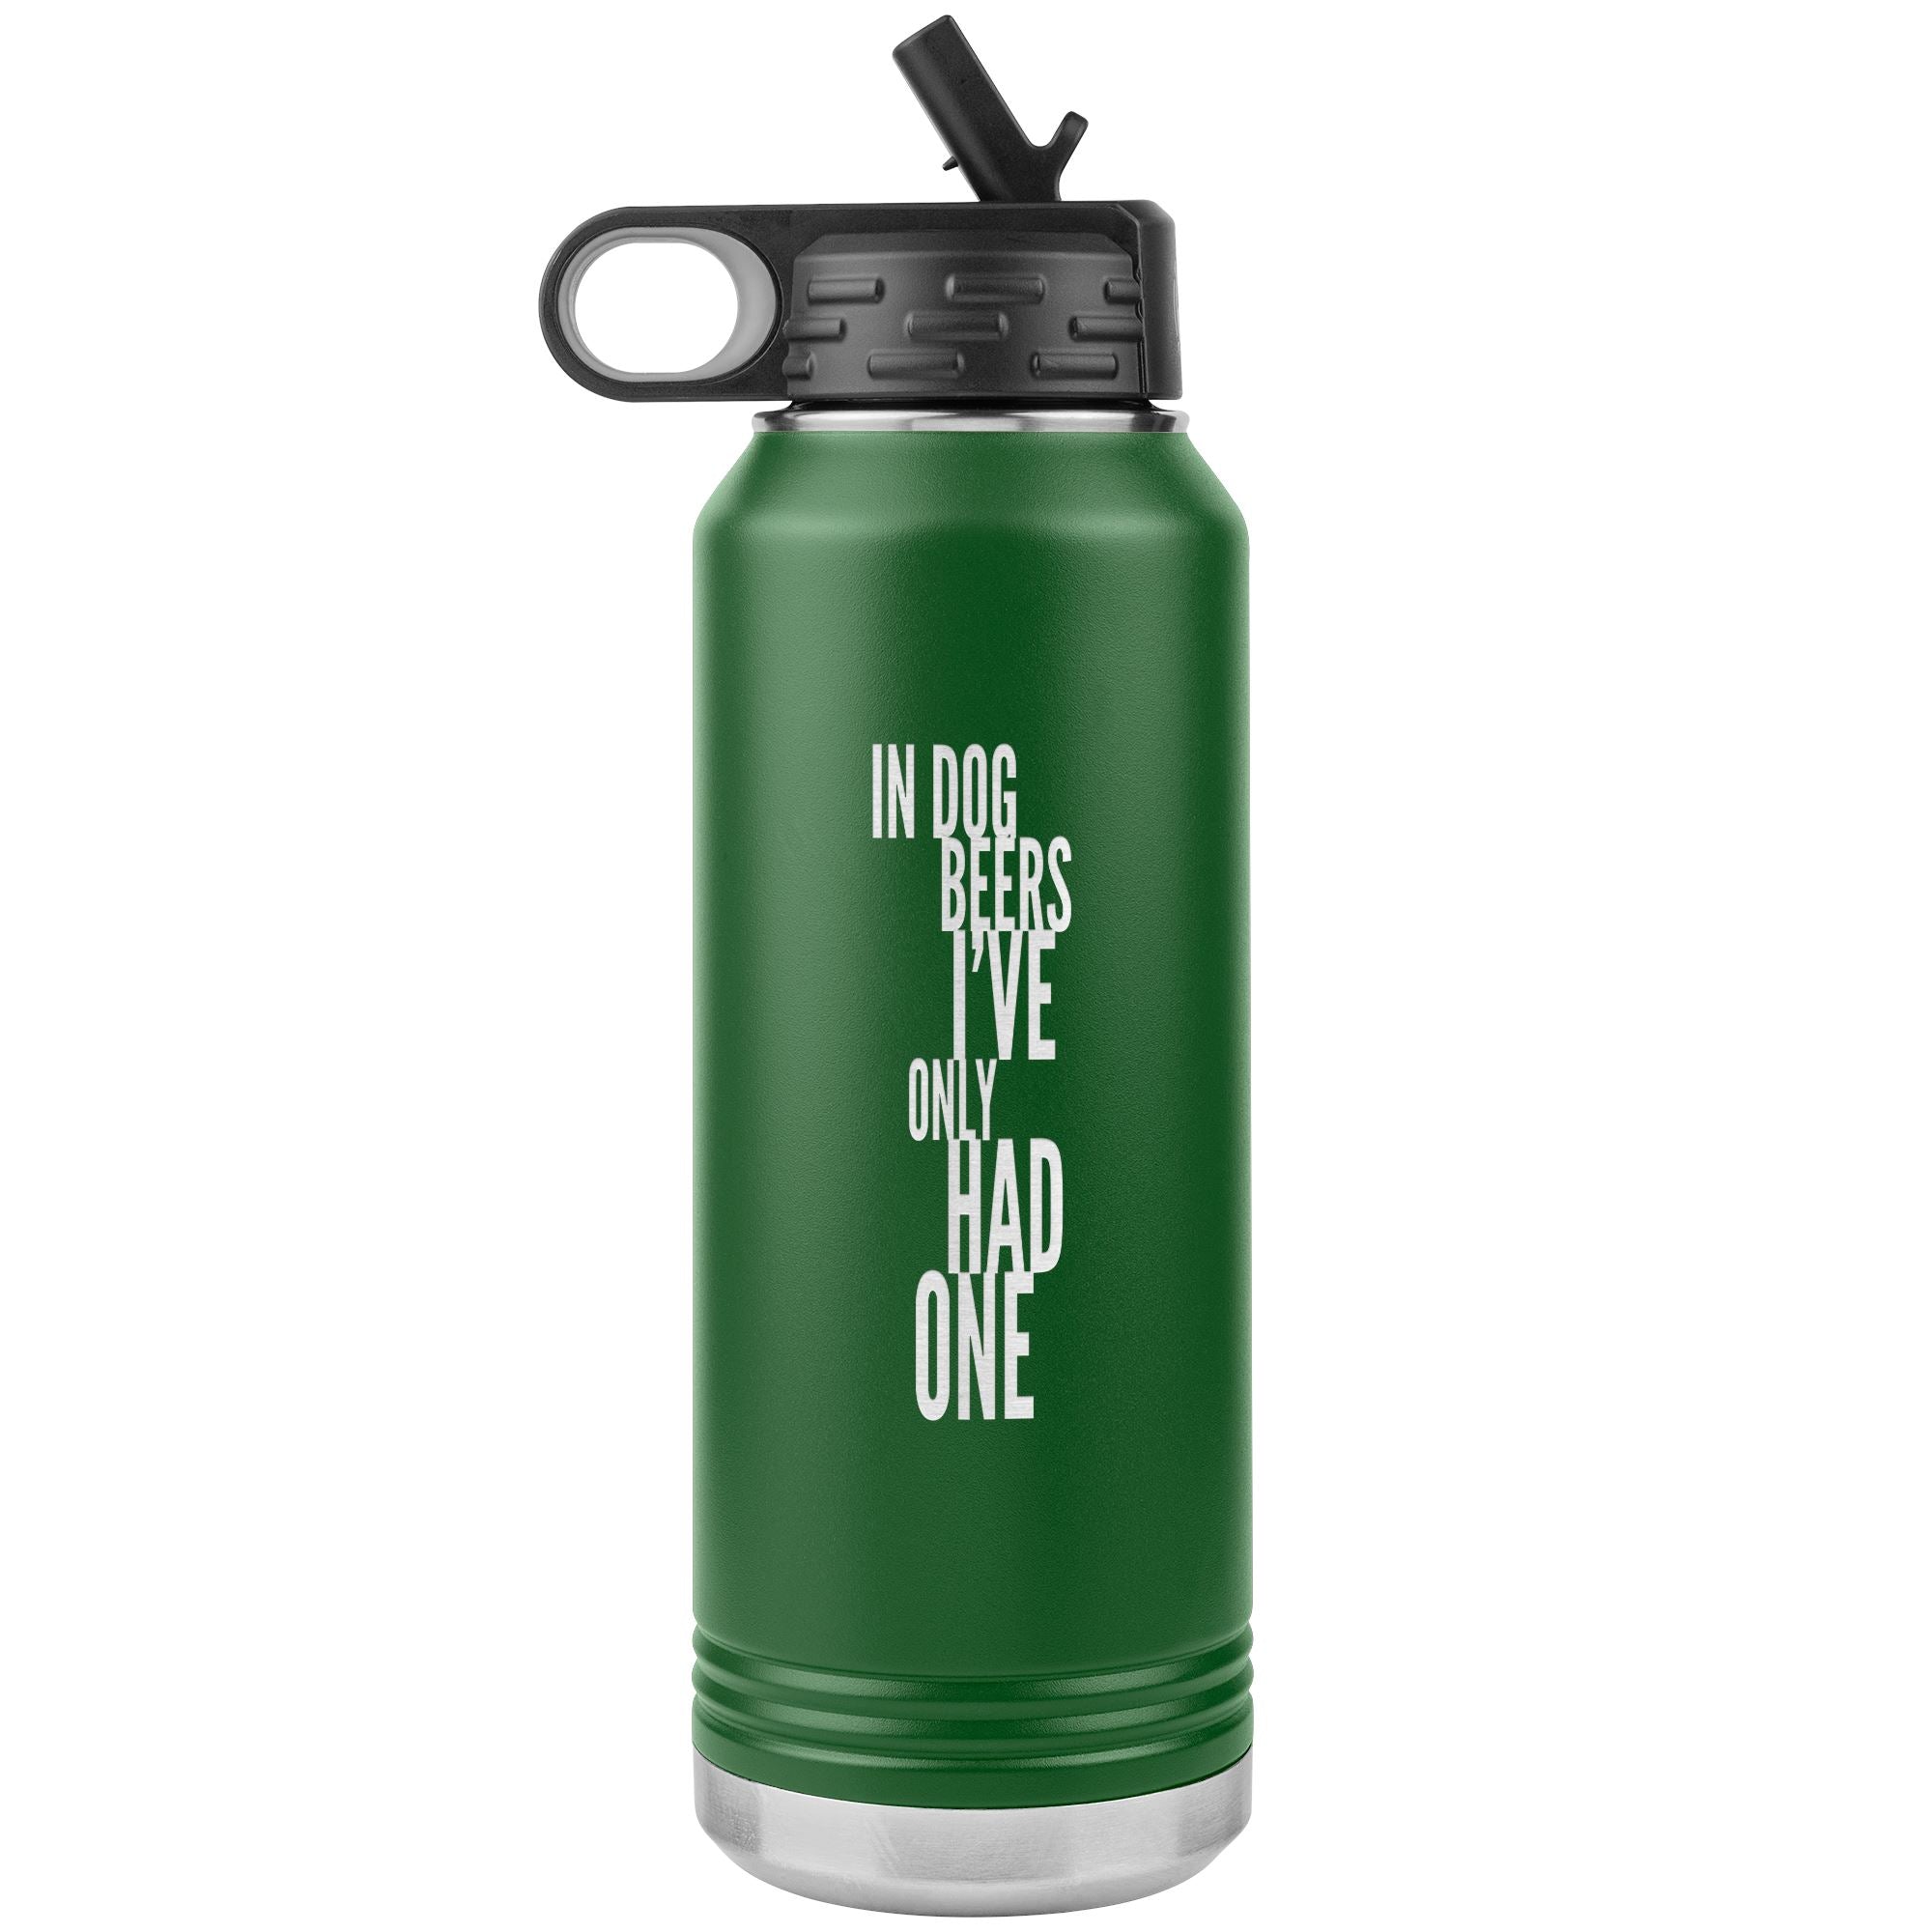 In Dog Beers I've Only Had One 32oz Tumbler Tumblers Green 